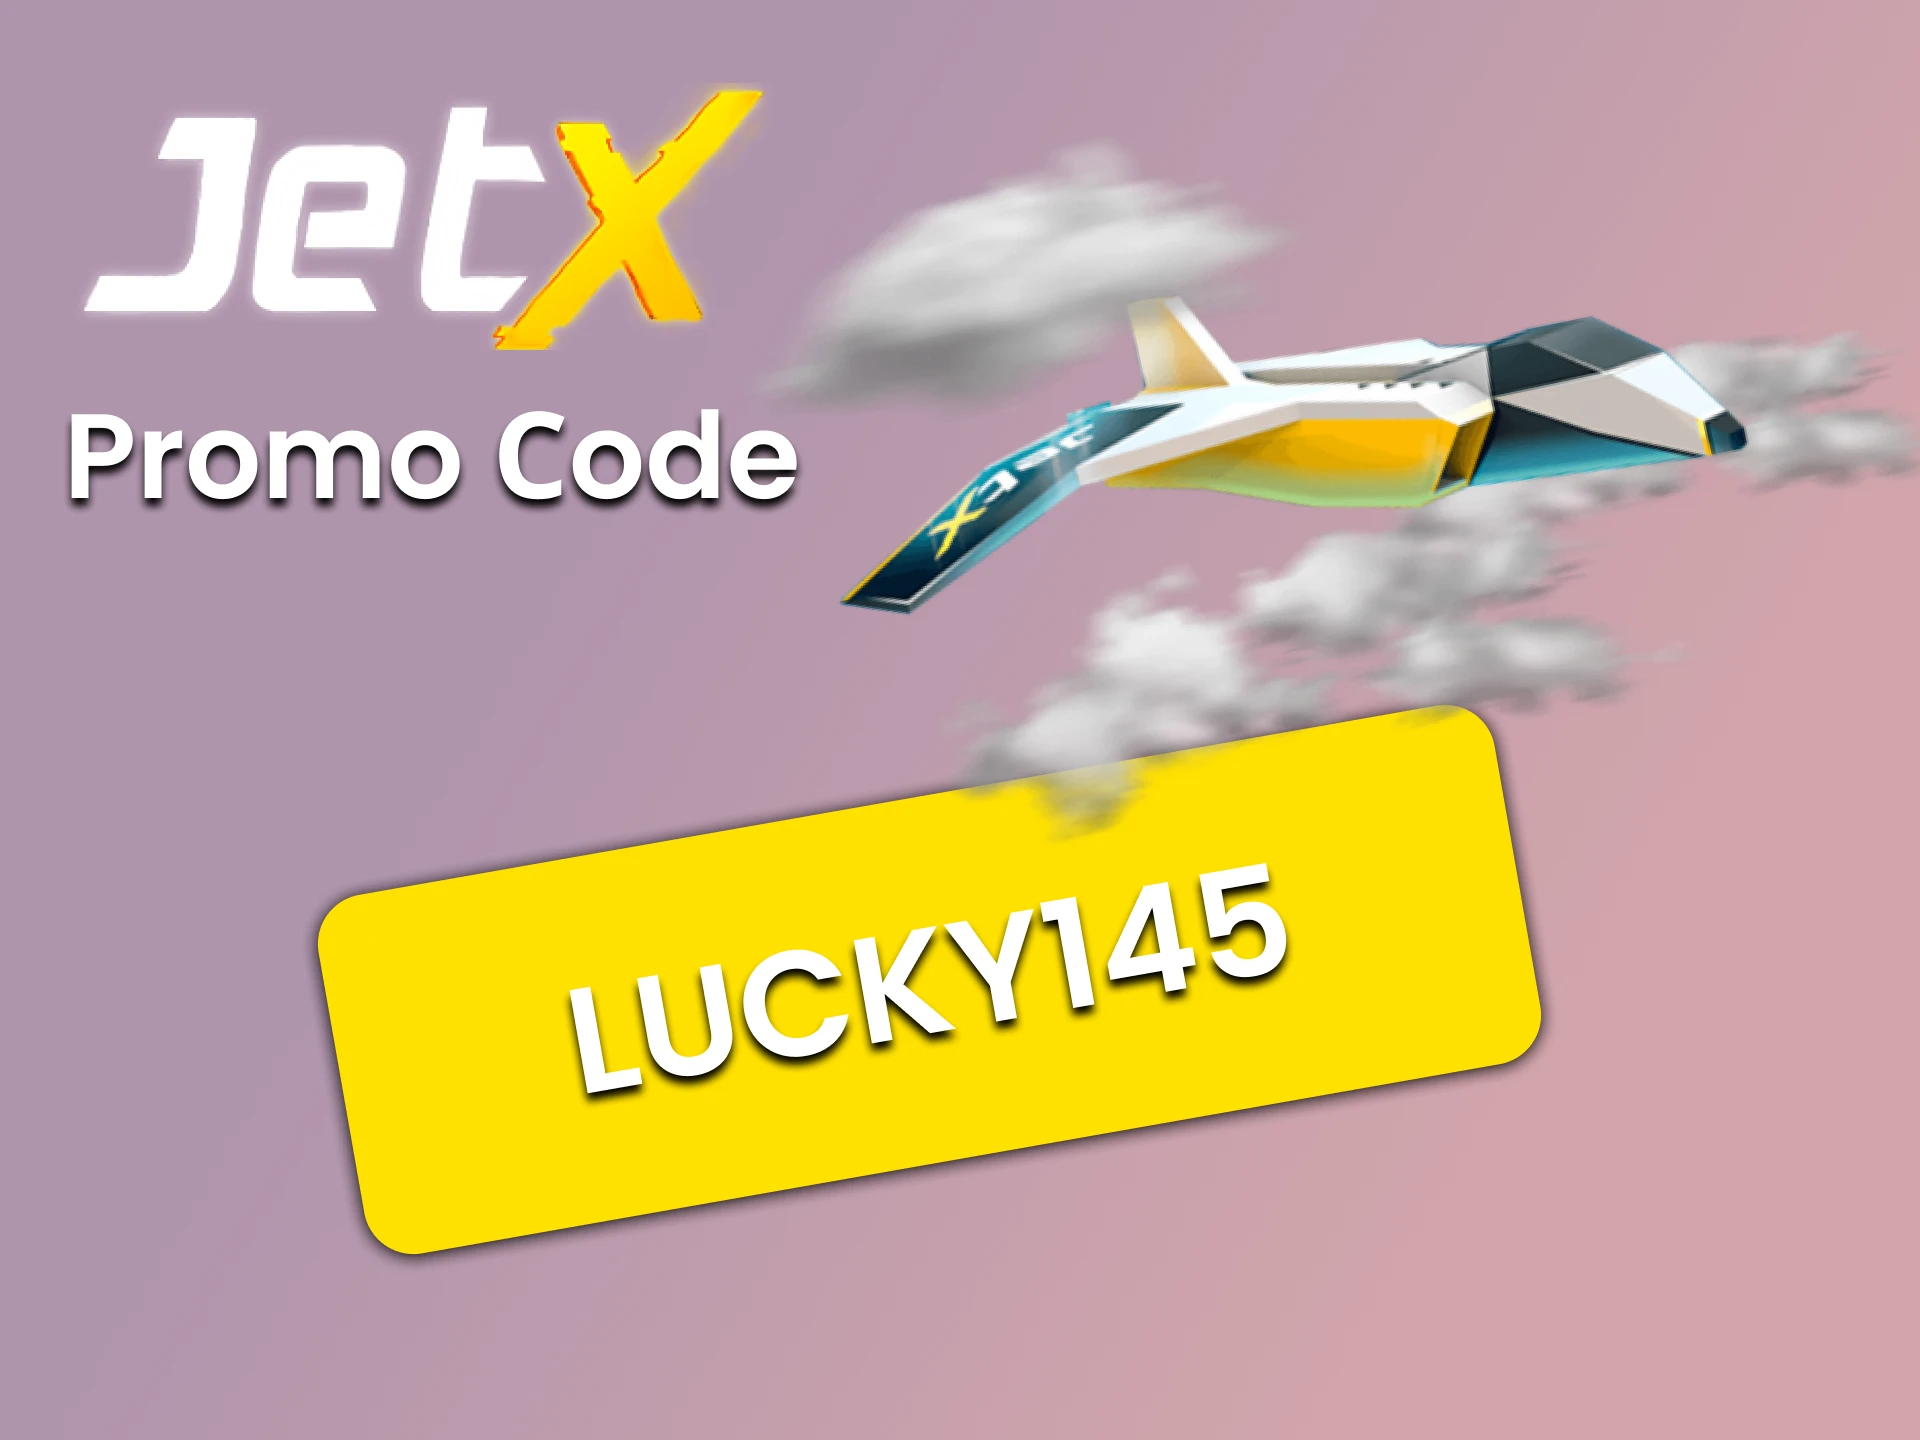 Use promo code to play JetX.